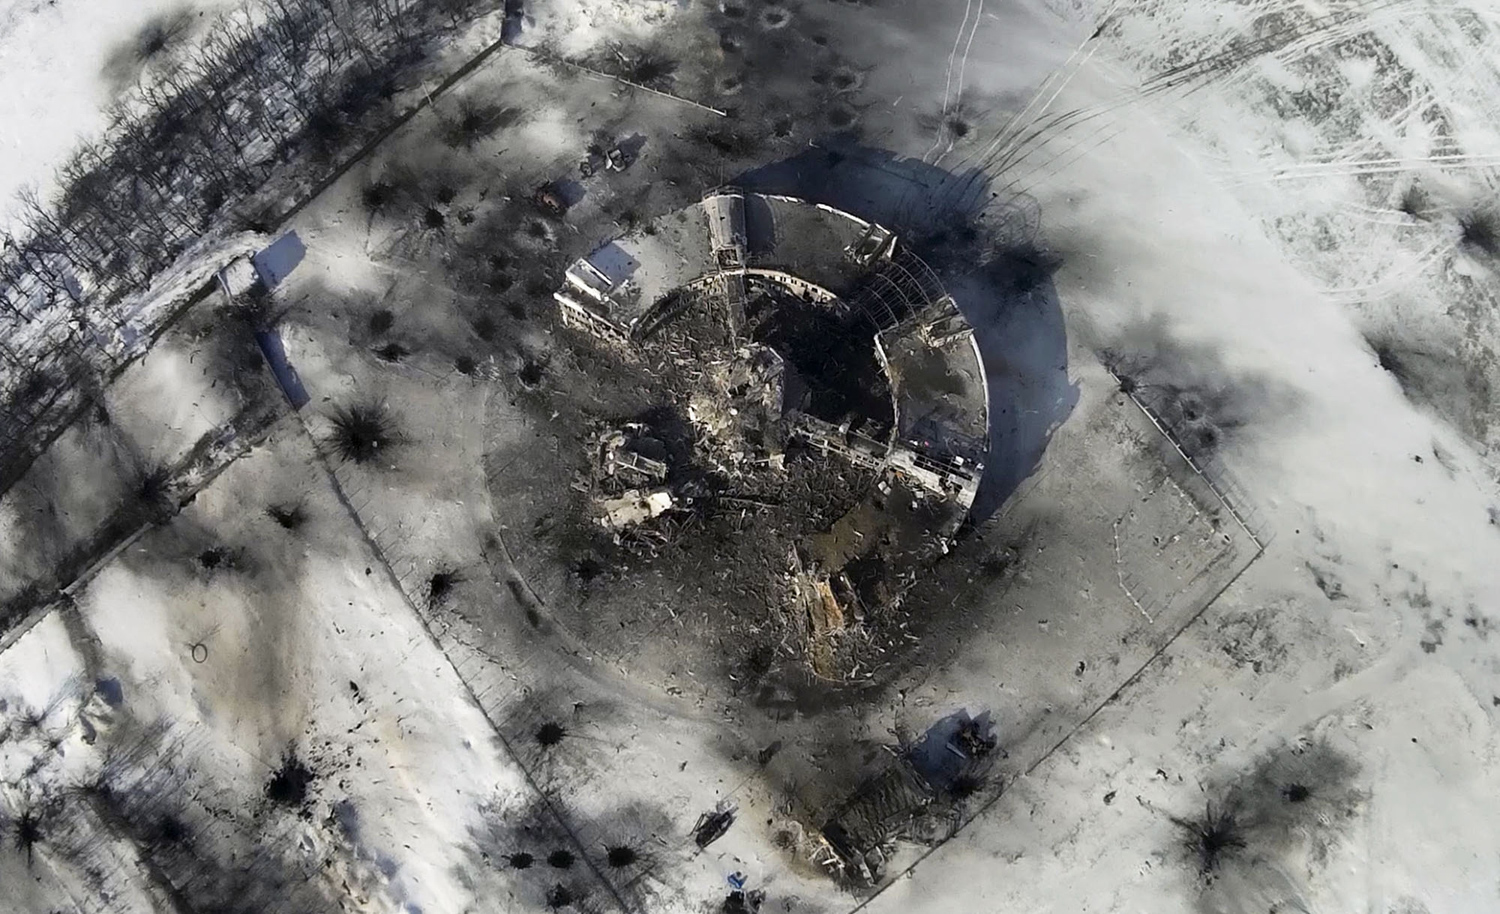 Donetsk Airport: This photo taken by a drone on January 15, 2015 shows the destroyed control tower surrounded by craters and debris at the airport in Donetsk. Photo: ArmySOS, via theatlantic.com